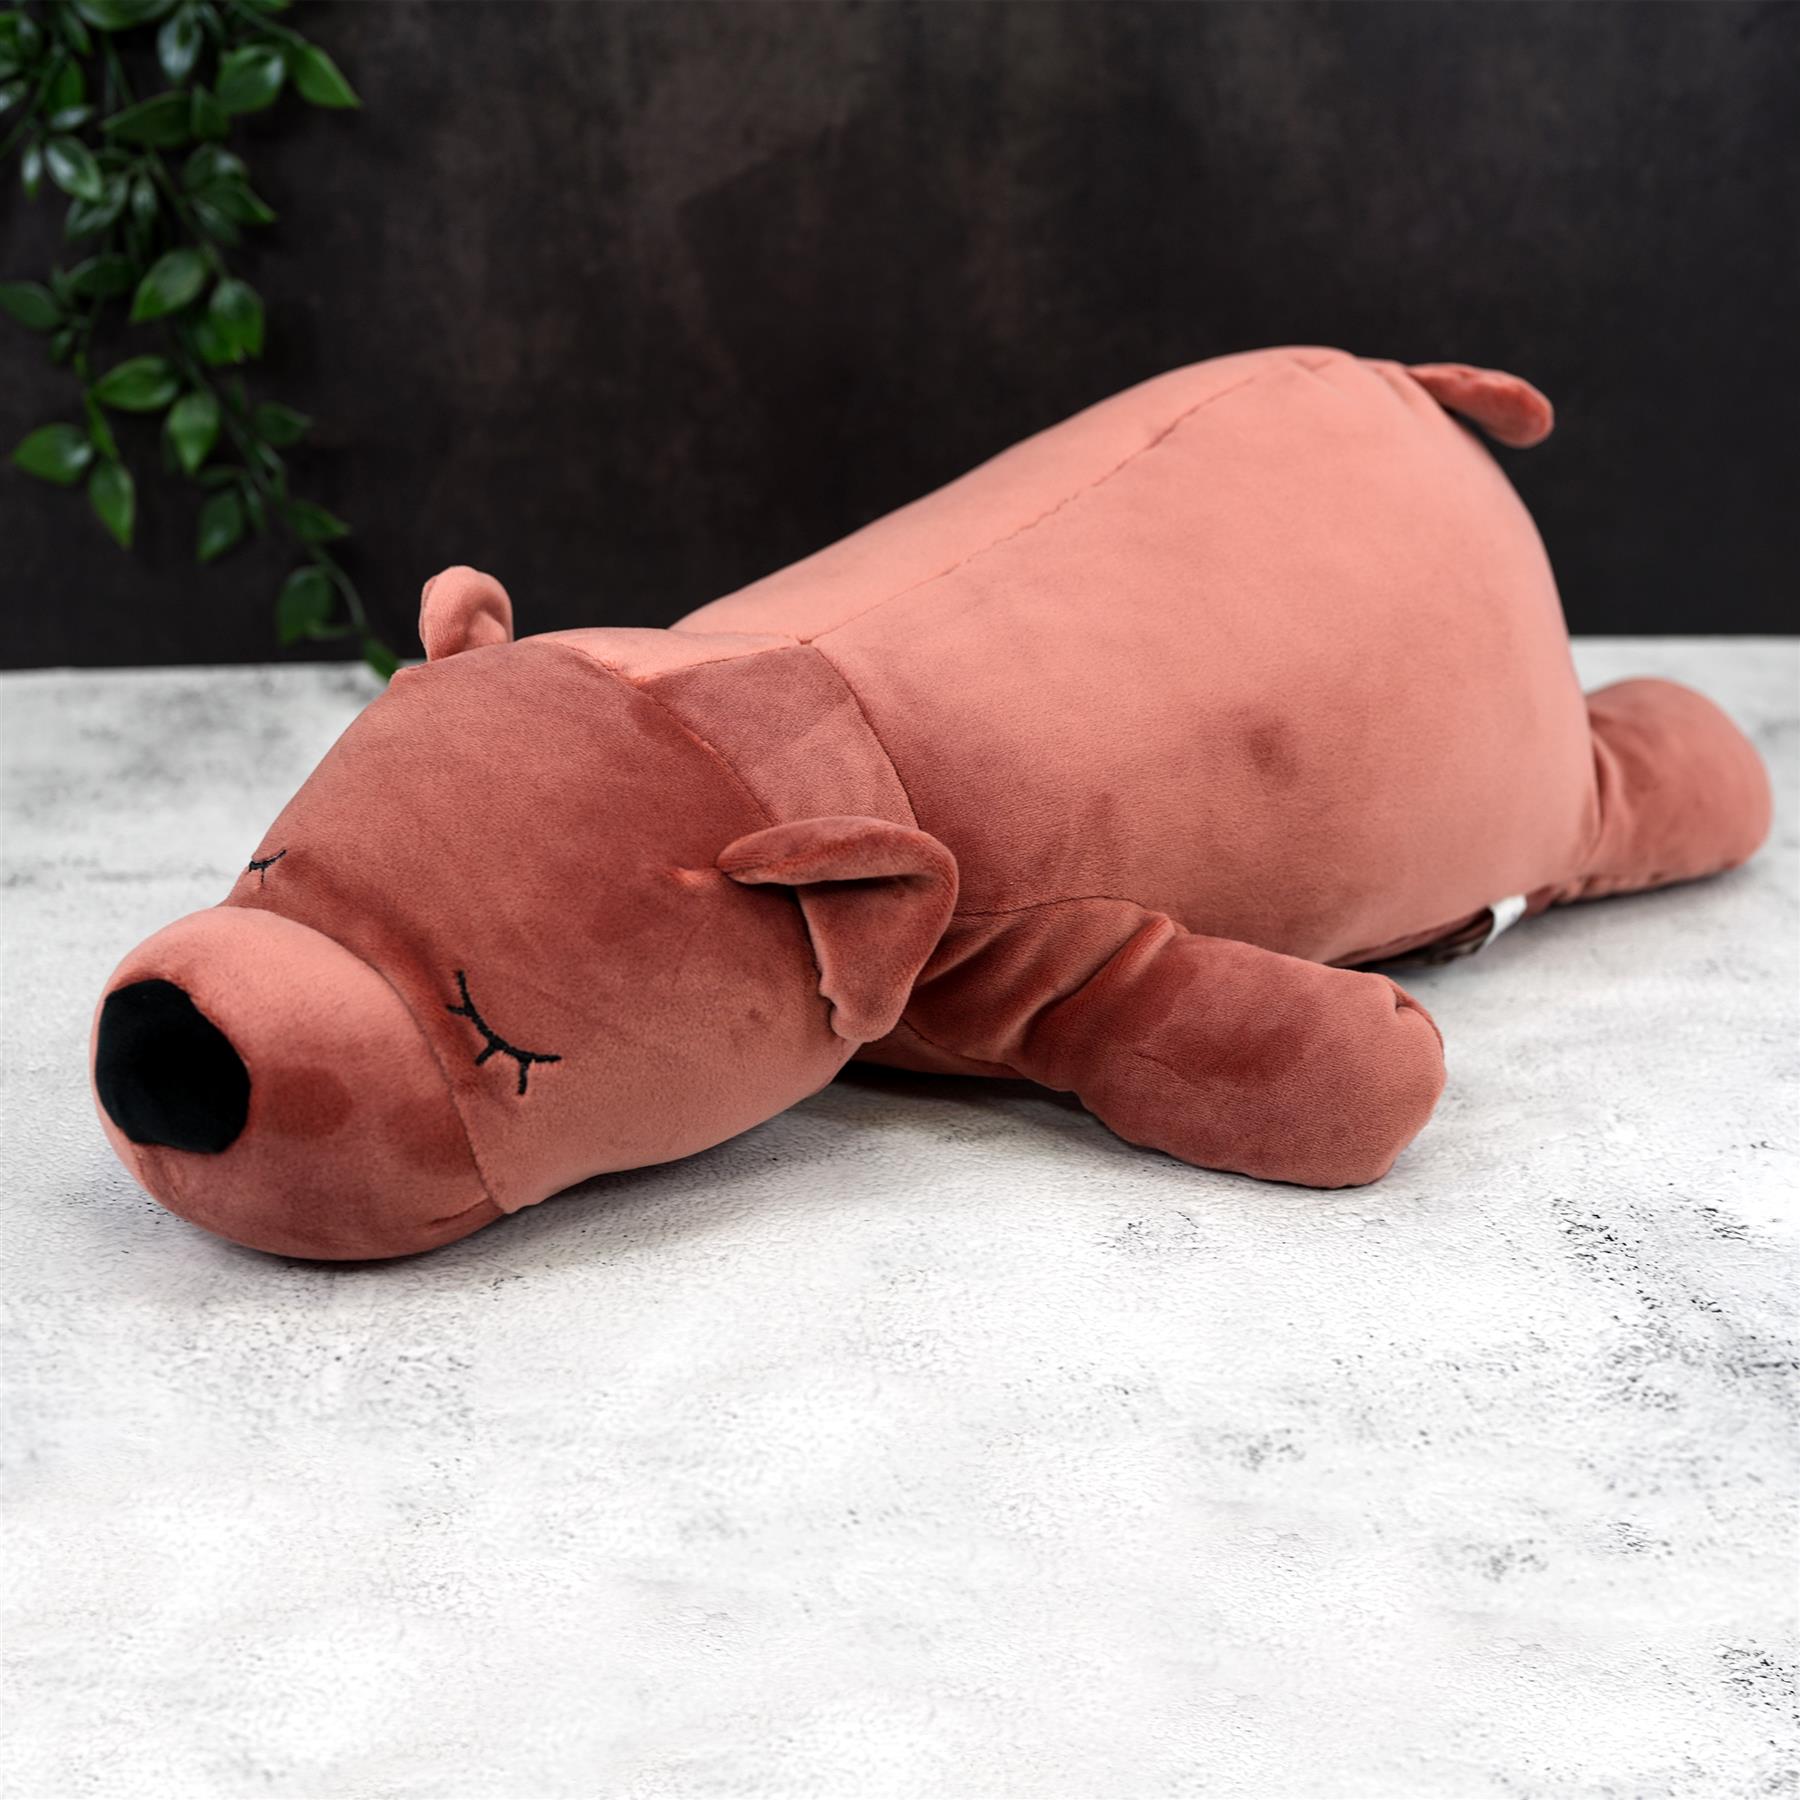 20” Super-Soft Bear Plush Pillow Toy by The Magic Toy Shop - UKBuyZone